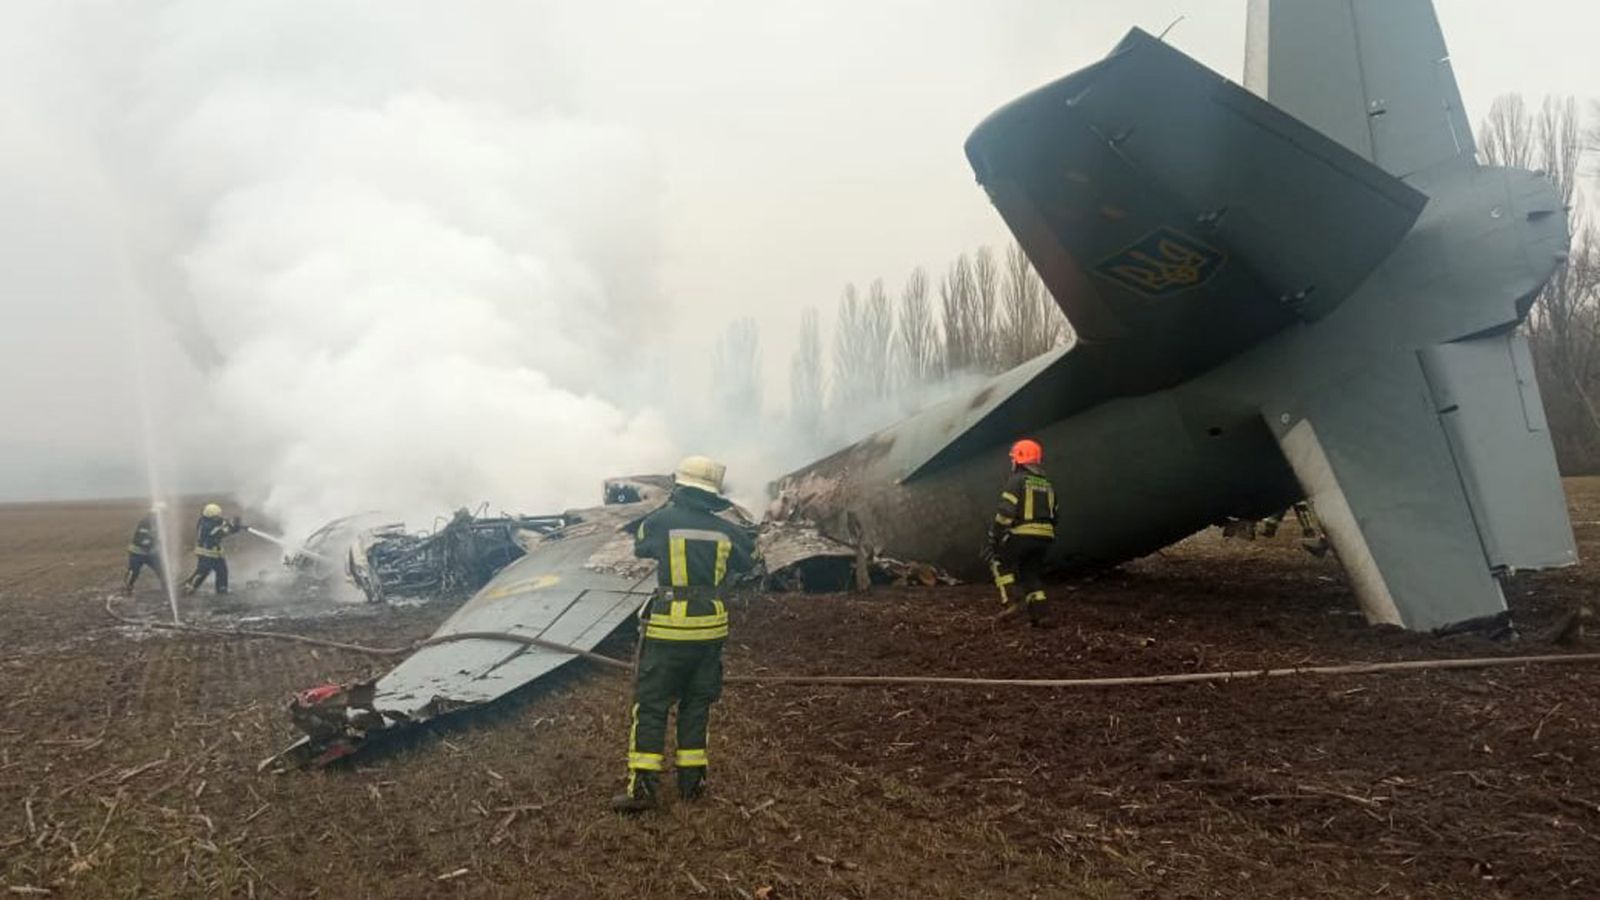 epa09781411 A handout photo released by the press service of the State Emergency Service of Ukraine on 24 February 2022 shows emergency services working at the crash site of a military plane of the Armed Forces of Ukraine, in the Obukhiv district, near Kiev, Ukraine (issued 24 February 2022). According to Ukraine's State Emergency Service the aircraft, with 14 people on board, crashed, with a subsequent fire, in the Kyiv region. Five people died in the incident, the Ministry of Internal Affairs of Ukraine said in a statement.  EPA/STATE EMERGENCY SERVICE OF UKRAINE HANDOUT -- BEST QUALITY AVAILABLE -- MANDATORY CREDIT: STATE EMERGENCY SERVICE OF UKRAINE -- HANDOUT EDITORIAL USE ONLY/NO SALES